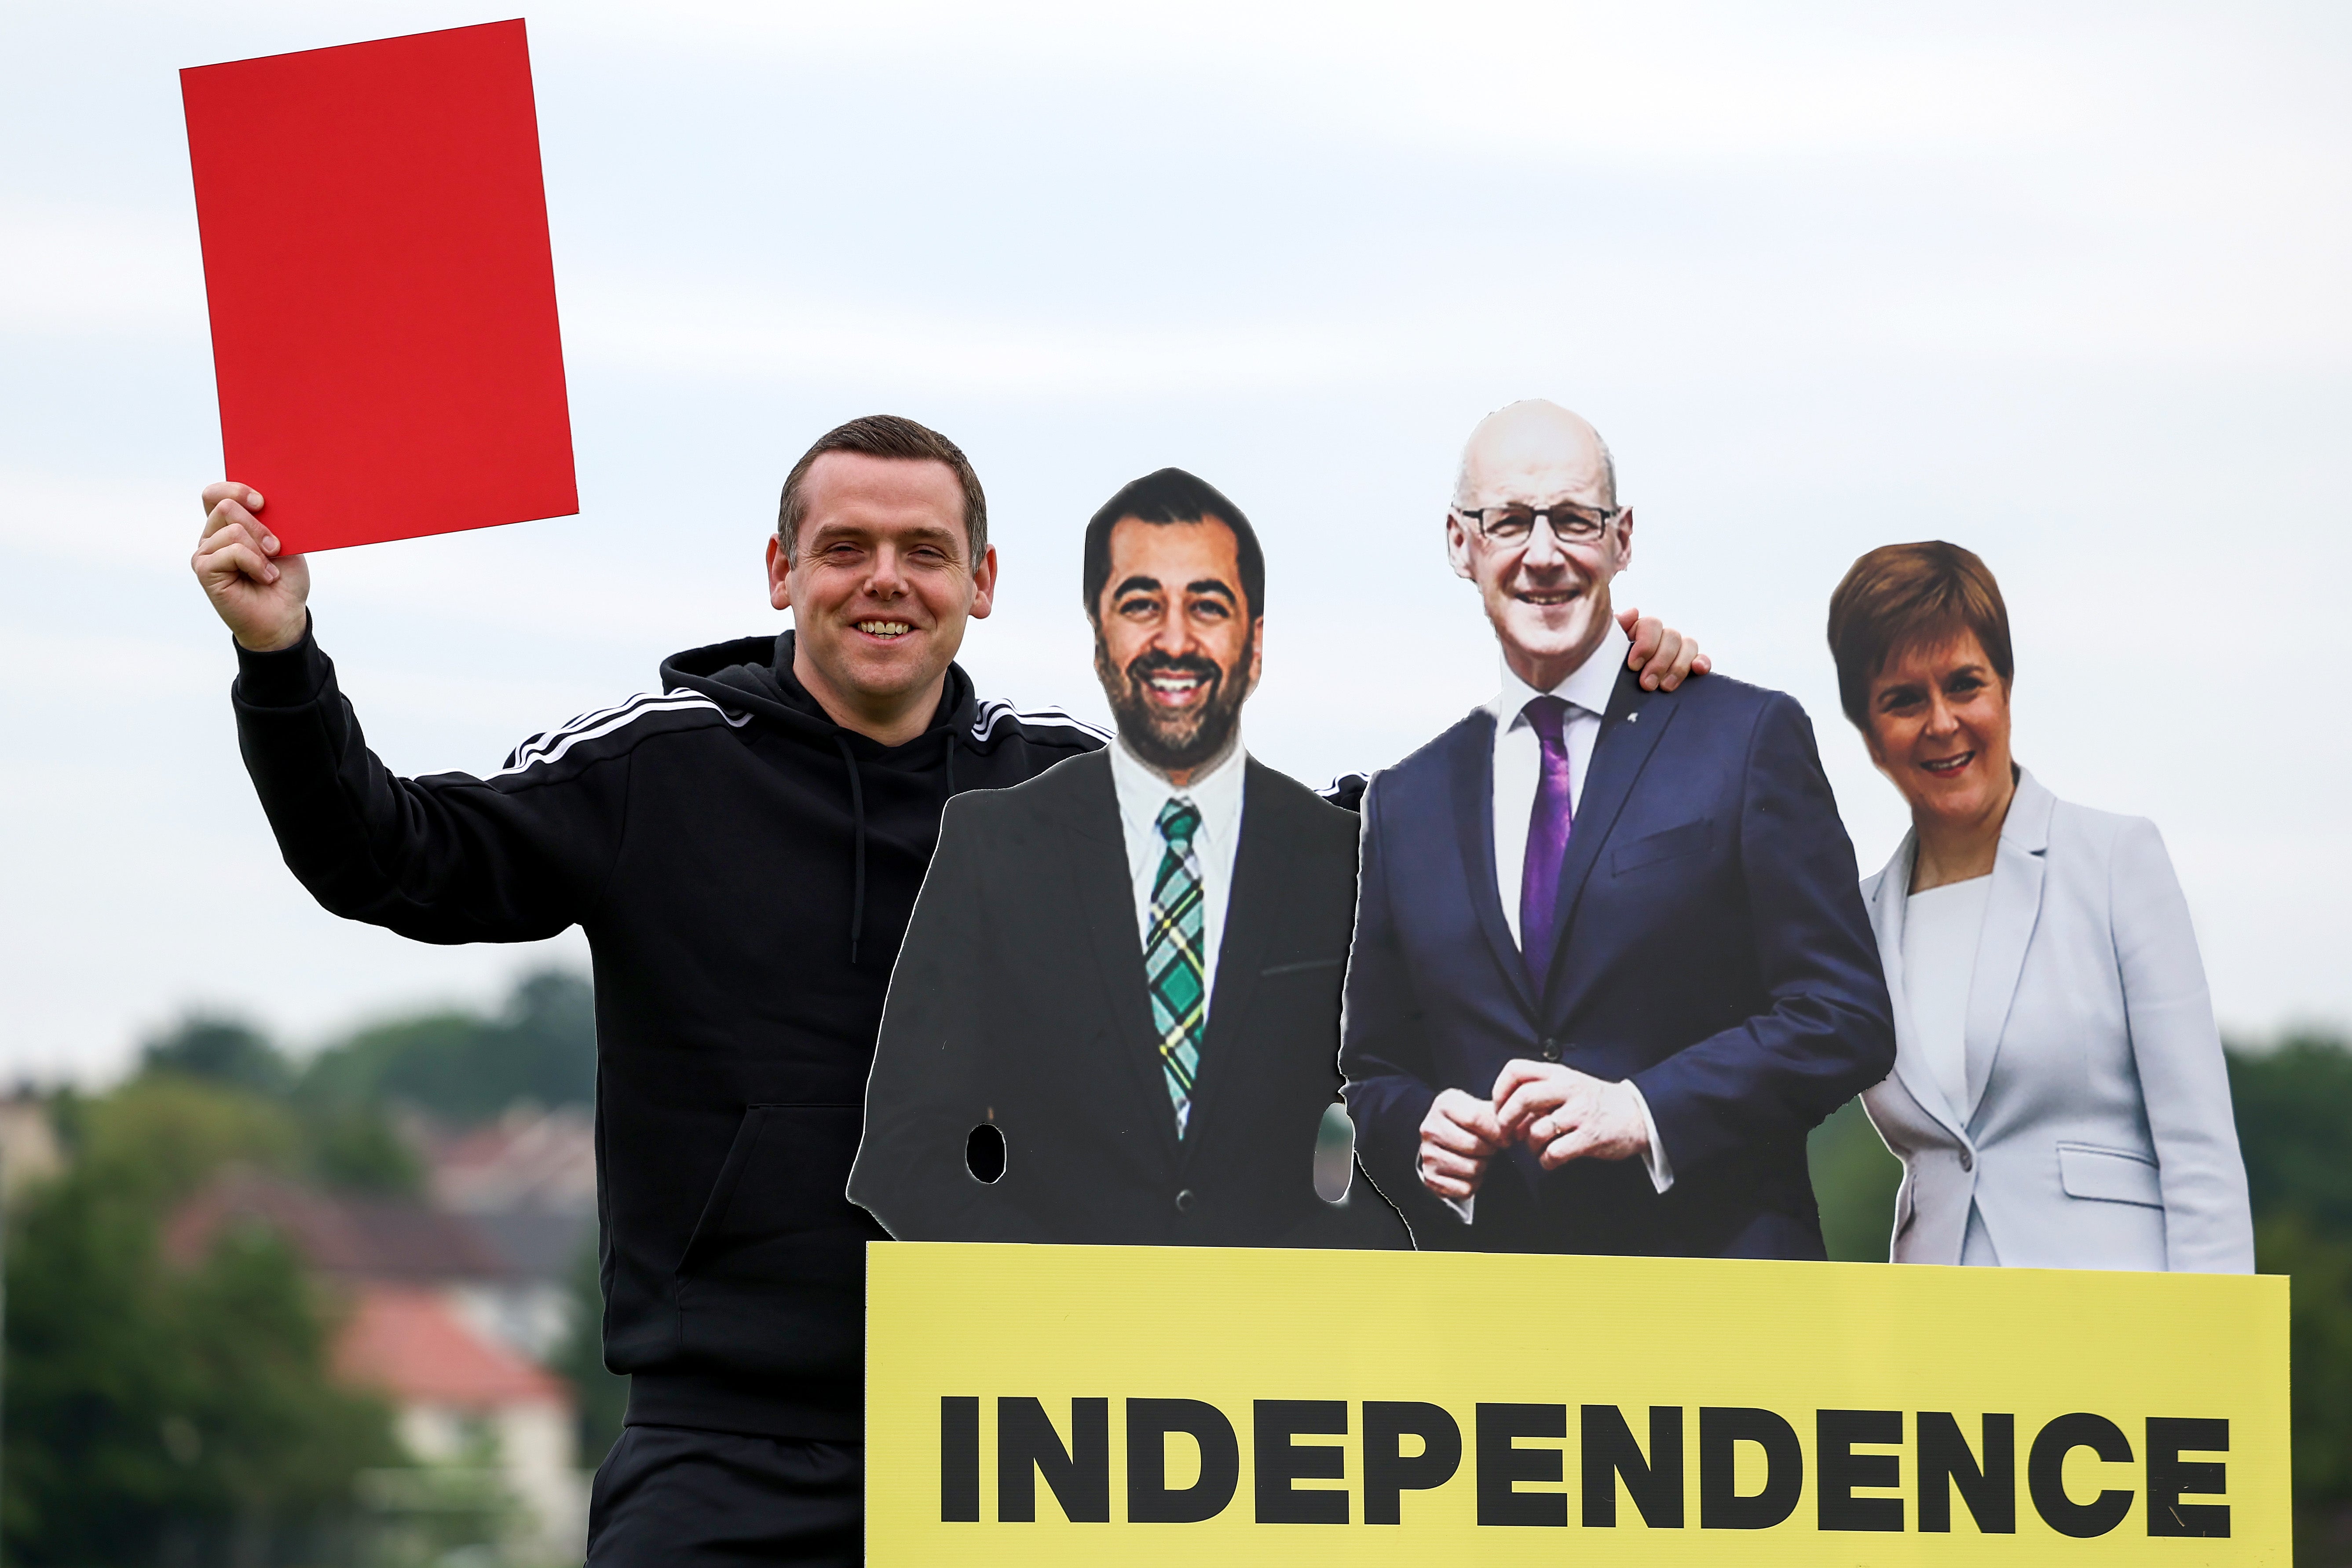 Scottish Conservative leader Douglas Ross holds up a red card to cardboard cutouts of John Swinney, Humza Yousaf and Nicola Sturgeon during an election campaign event